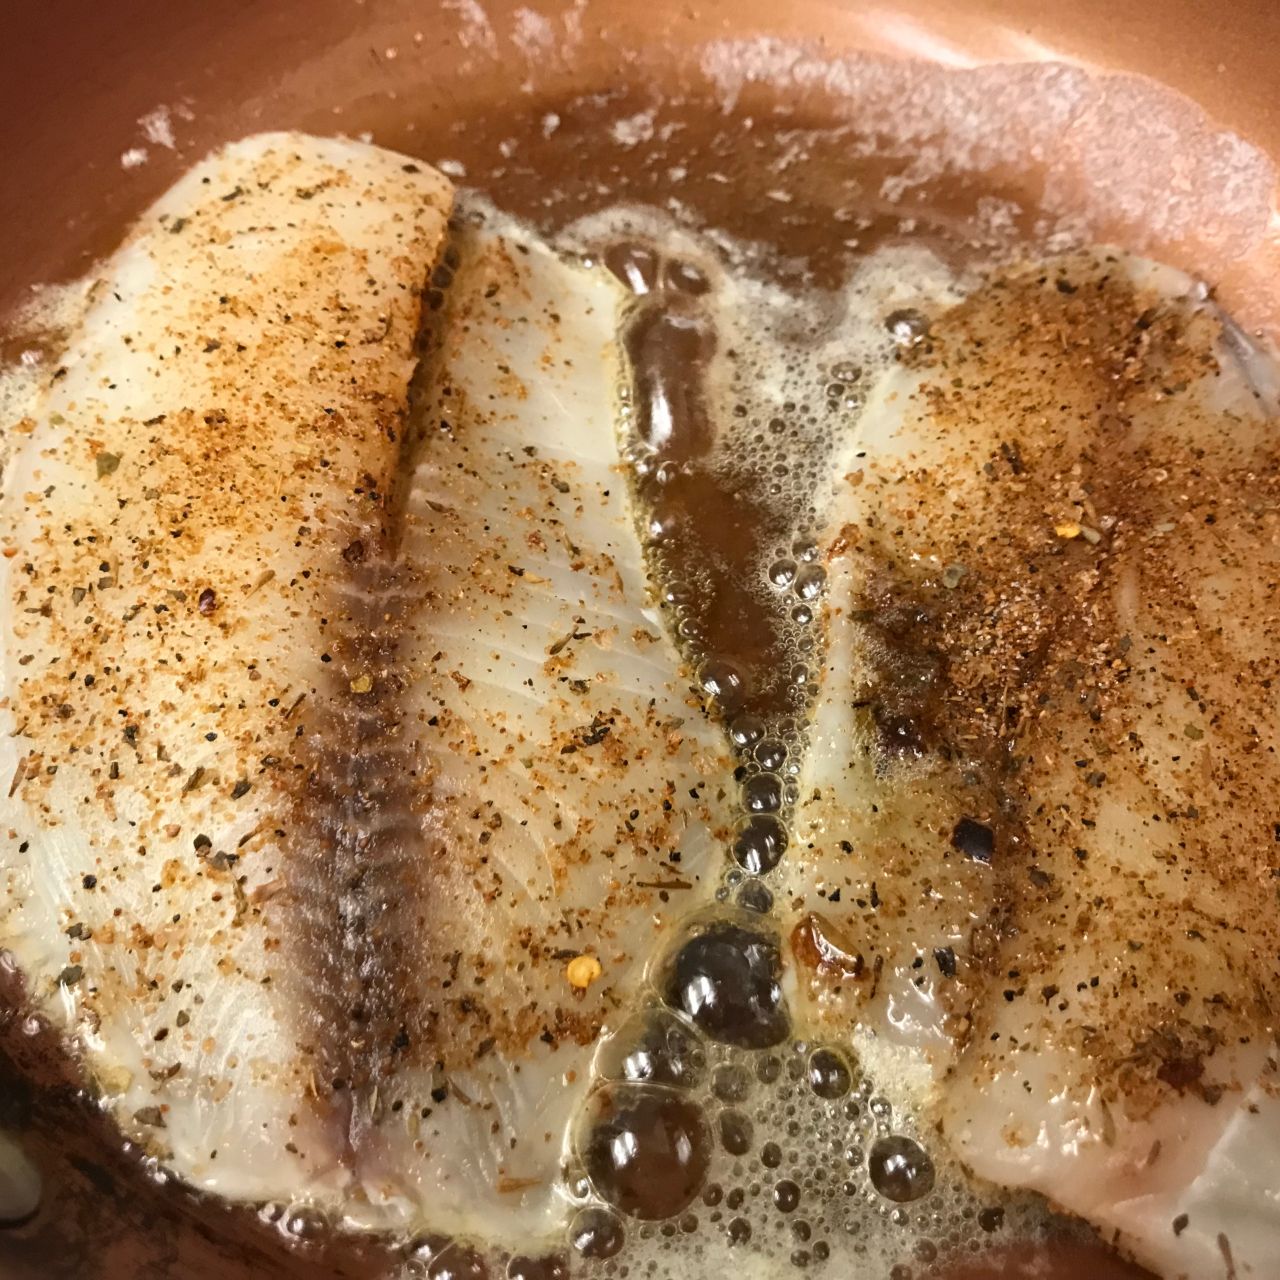 Tilapia and Dirty Rice | My Curated Tastes